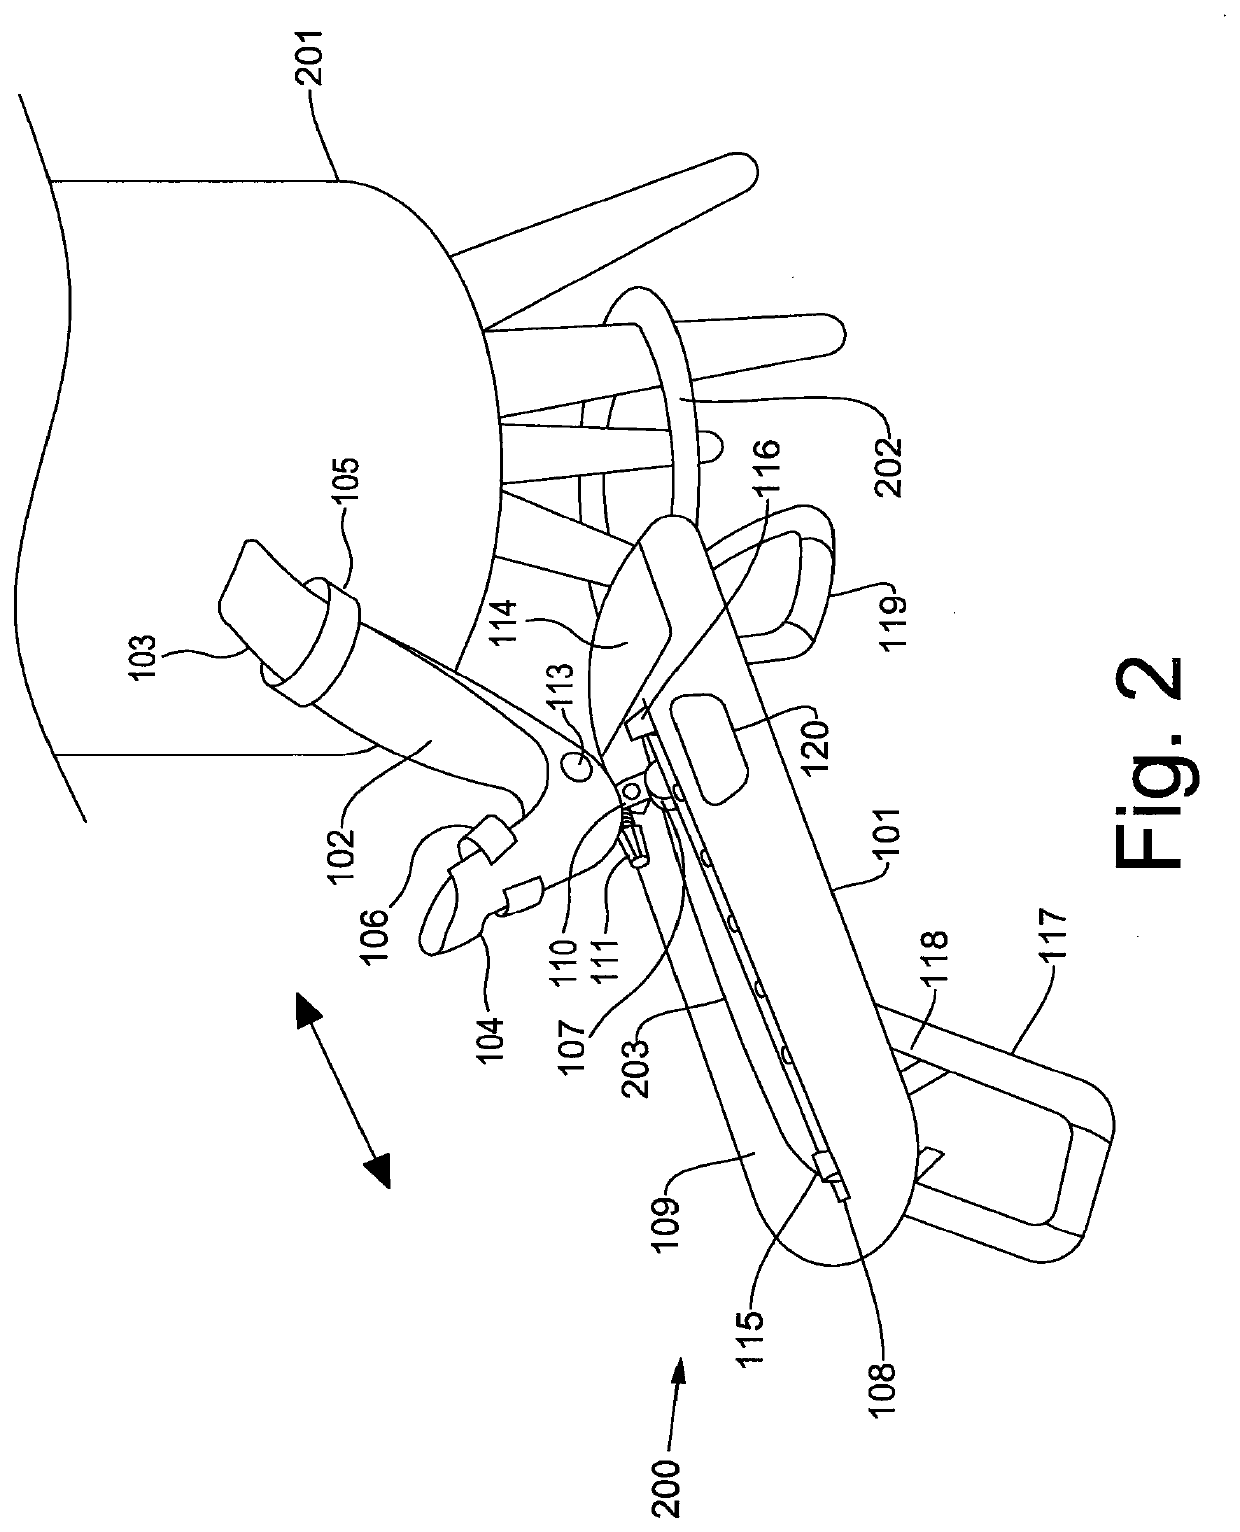 Portable therapeutic strengthening apparatus using adjustable resistance